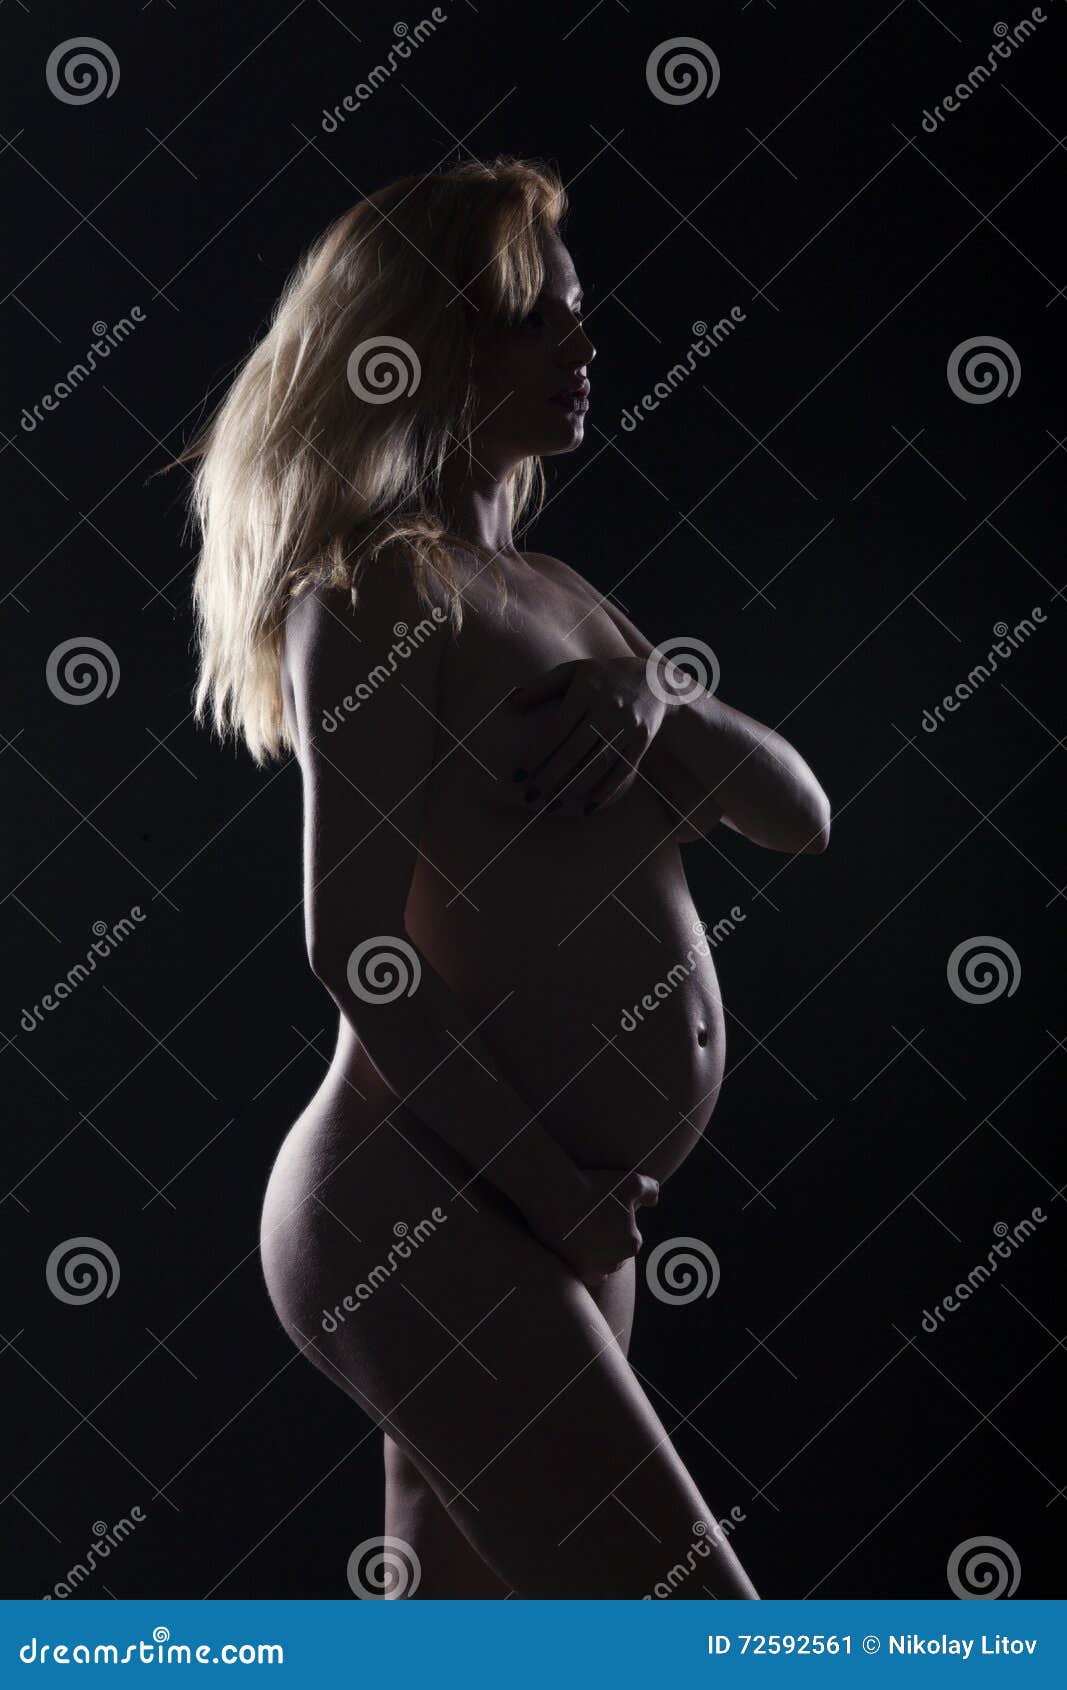 Long Hair Pregnant Nude - Naked pregnant woman stock image. Image of care, child ...